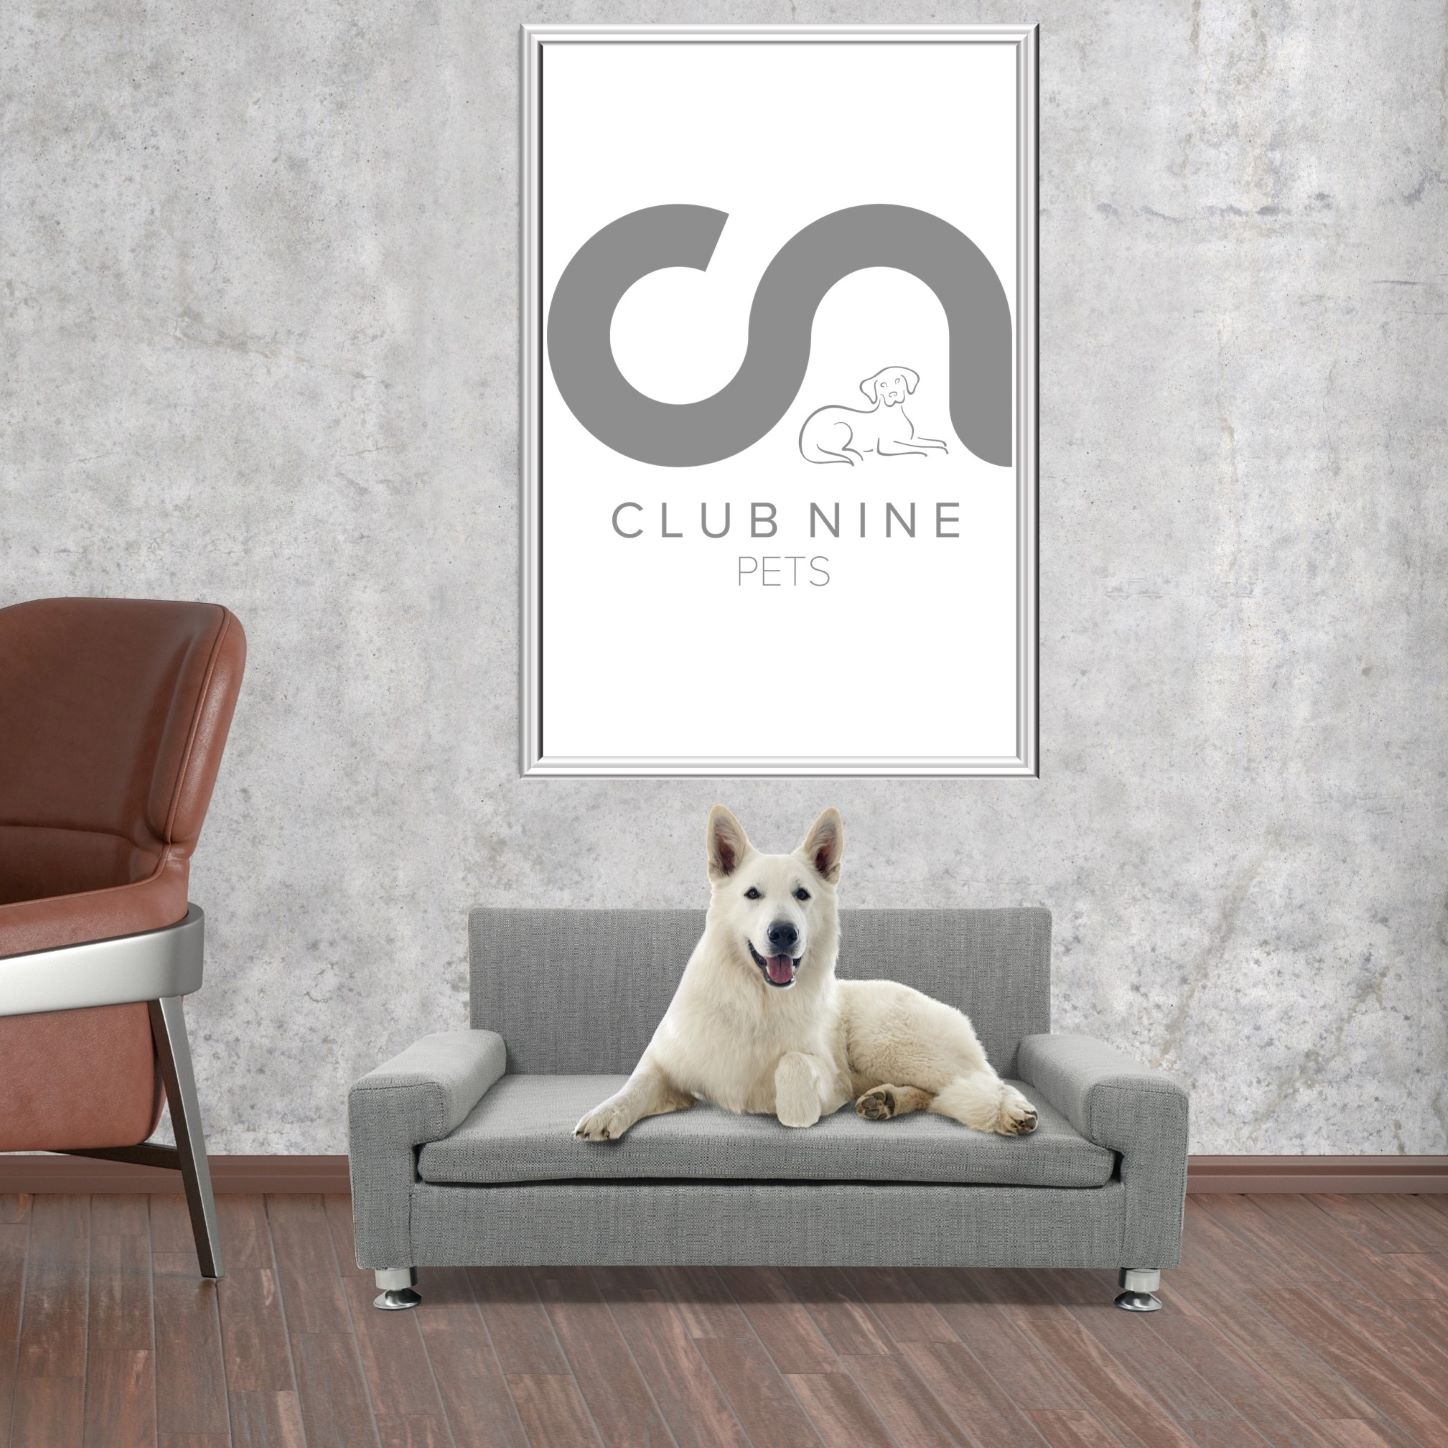 Cucciolo Orthopedic Dog Bed From Urban Modern Coll